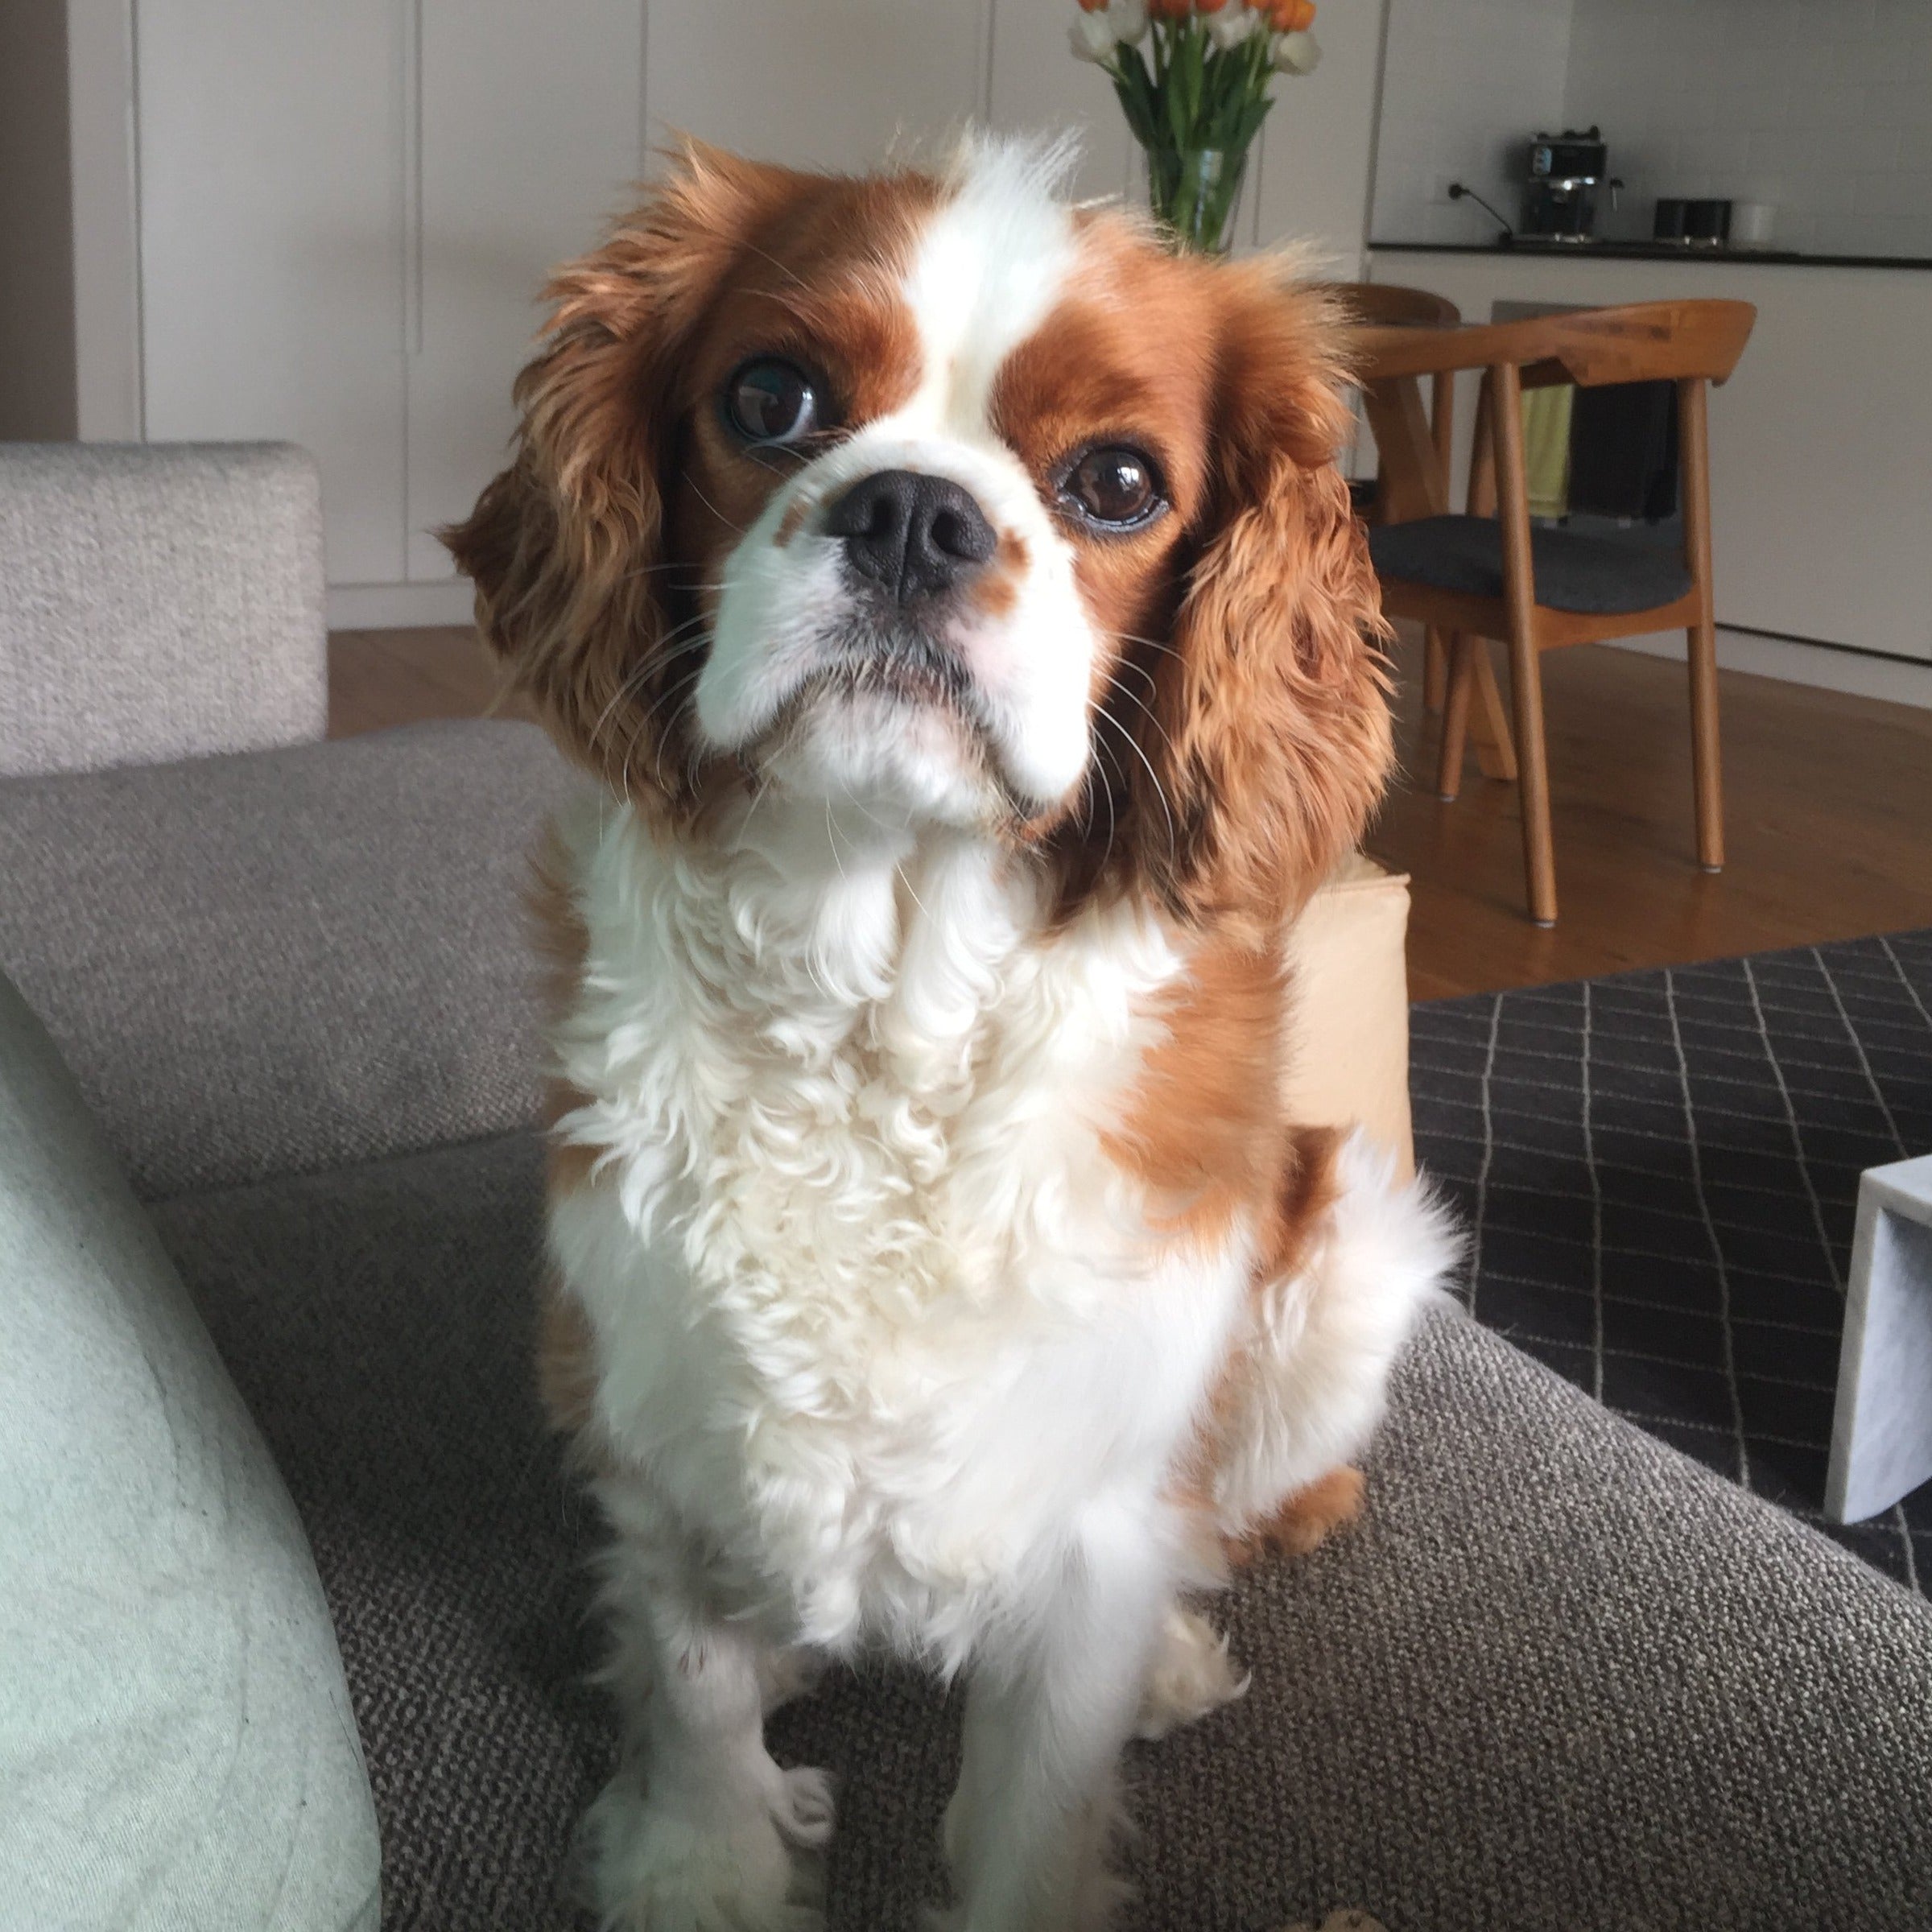 Toby the Cavalier King Charles Spaniel